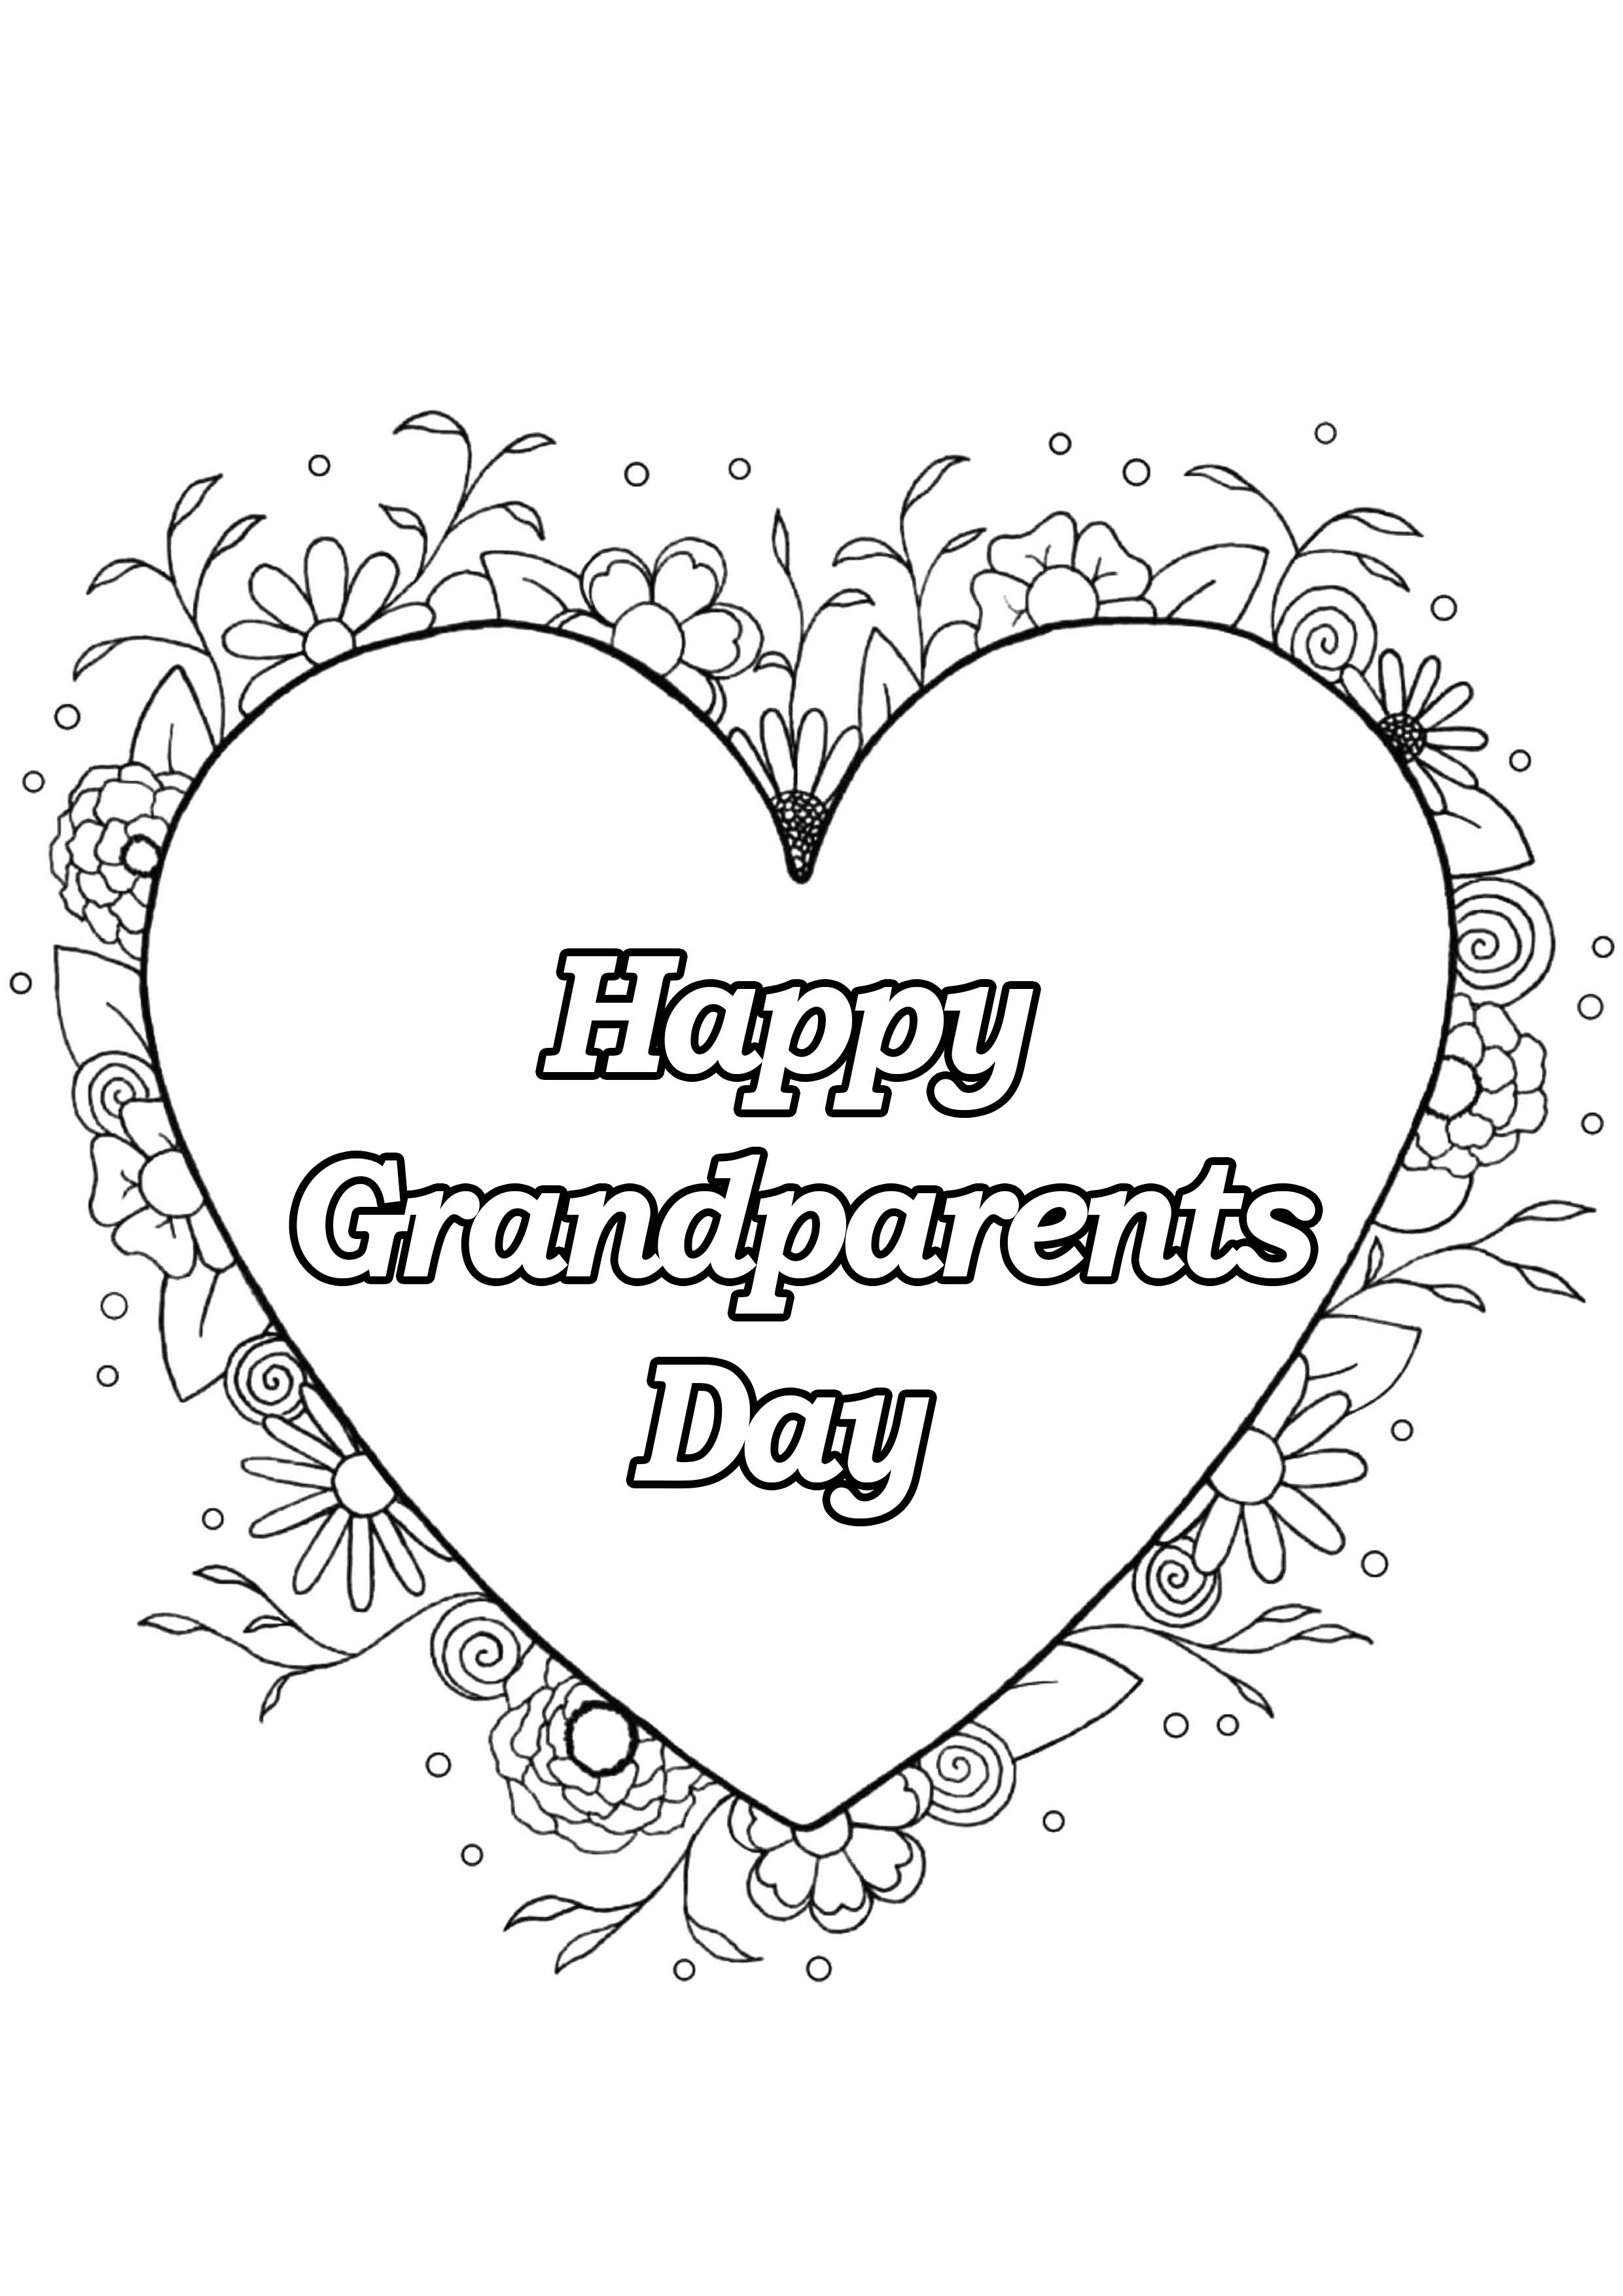 Grandparents Day 4 Grandparents Day Adult Coloring Pages